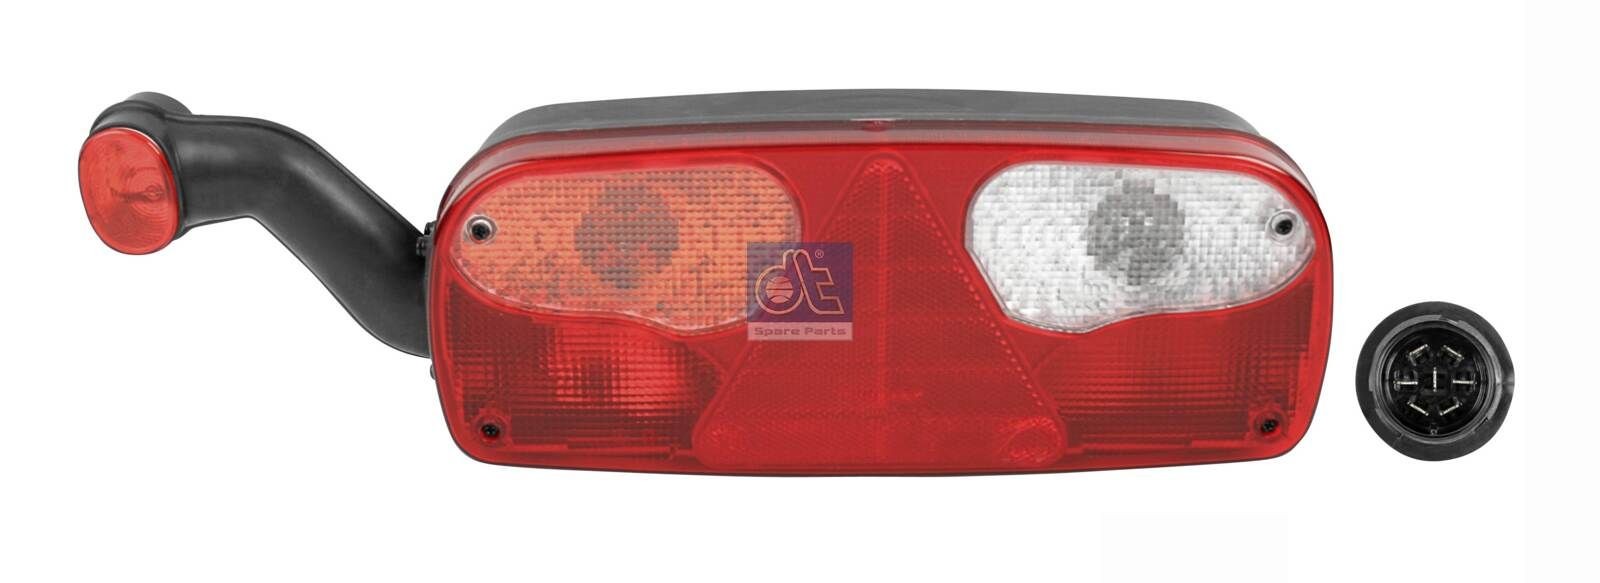 25-2211-007 DT Spare Parts Taillight 10.99043 buy